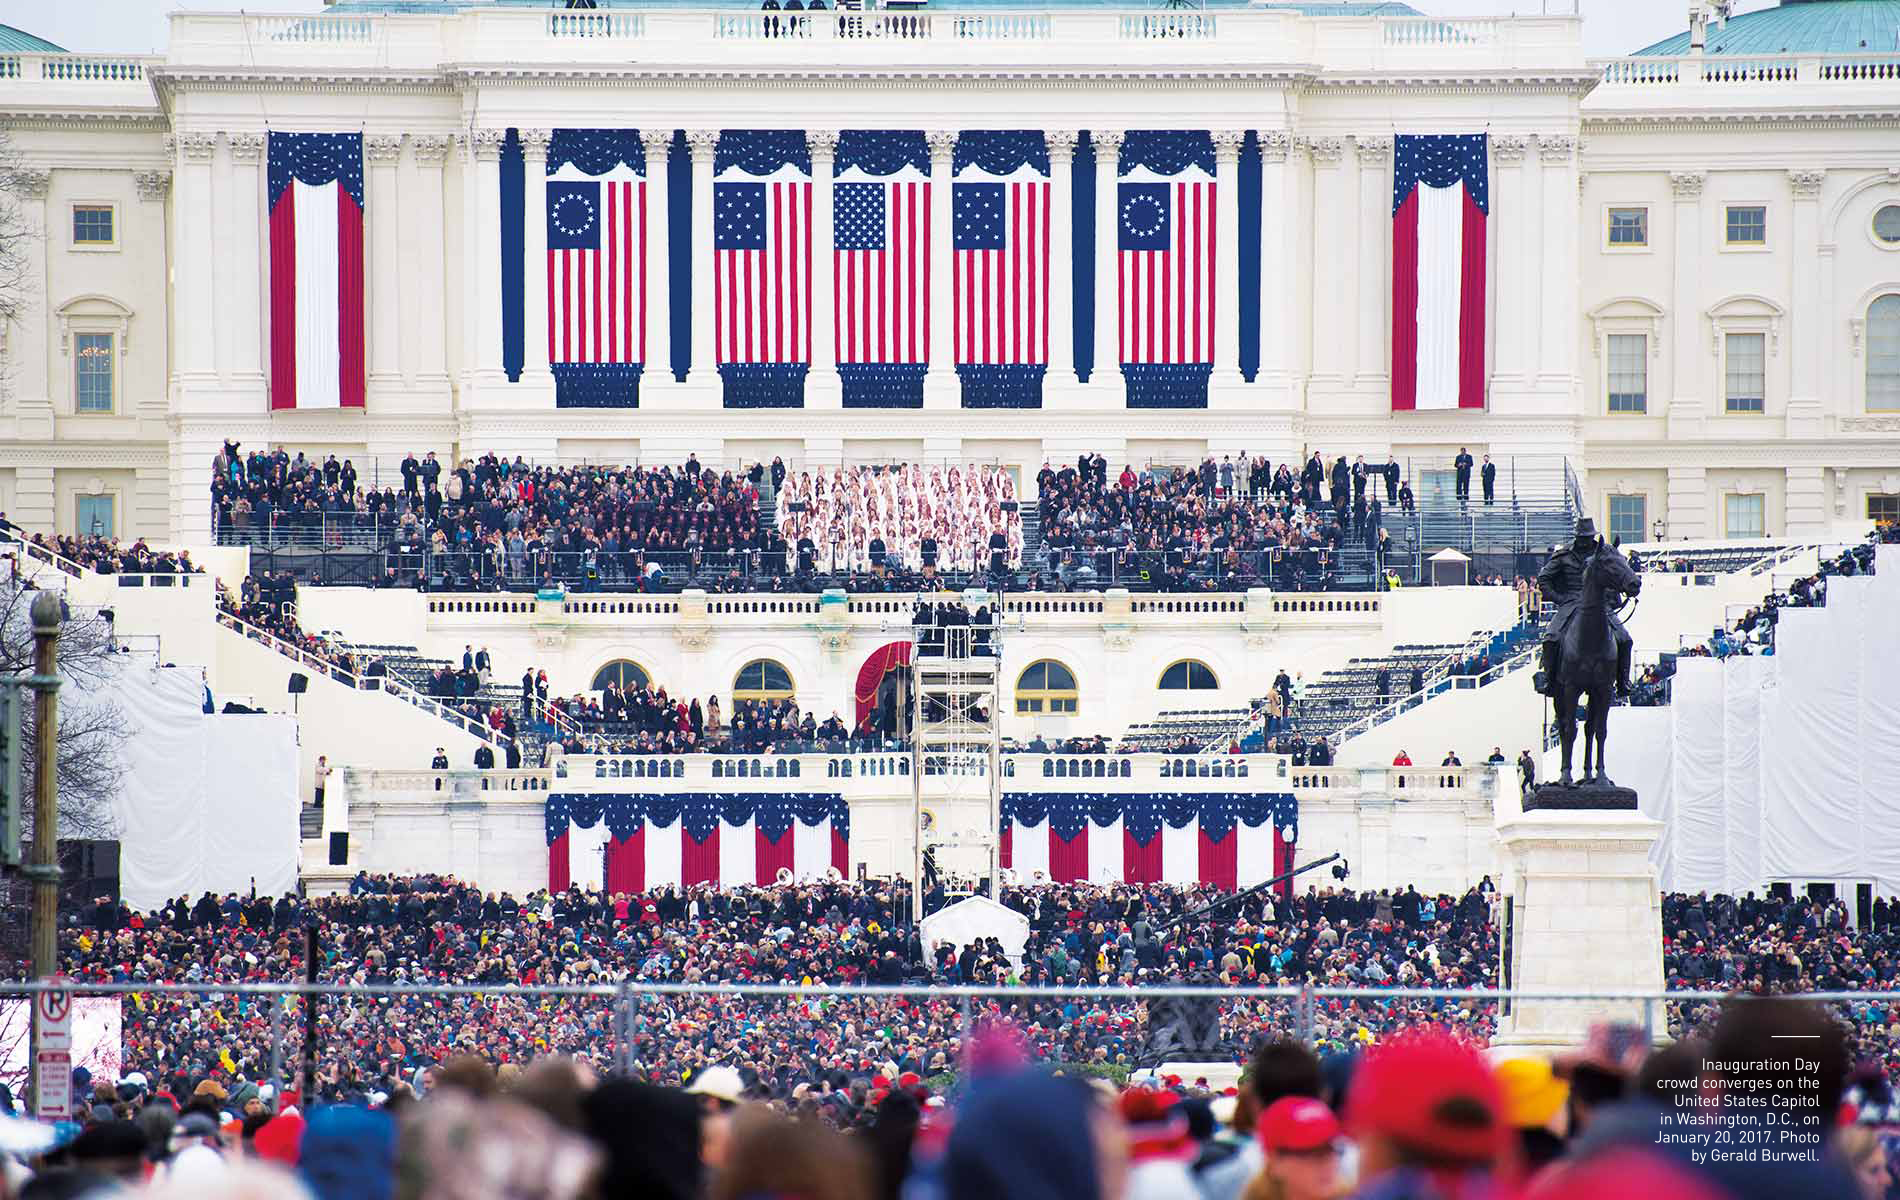 Inauguration Day crowd on the United States Capitol in Washington, D.C. January 20, 2017